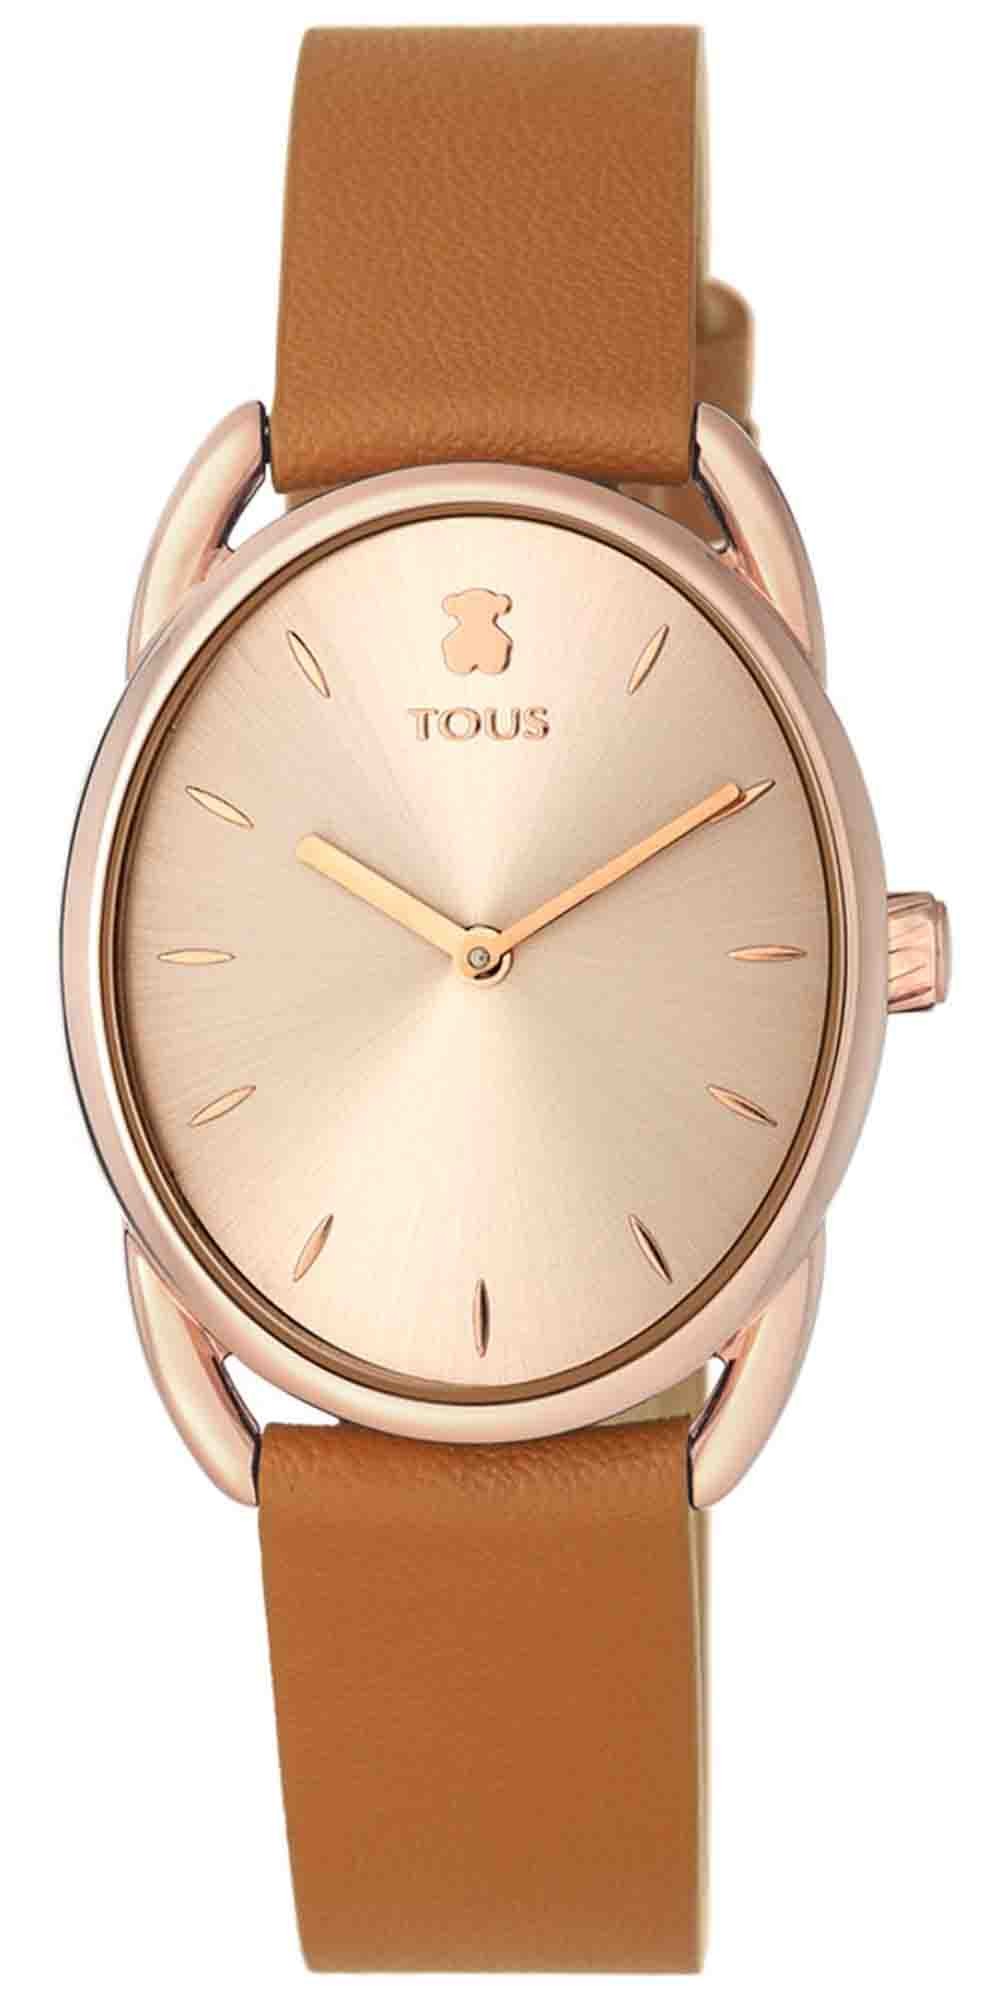 Tous Women's Watch Tous Watches Heritage Ladies Watch with Stainless Steel  Case White Dial and Bracelet 150656 900350395 | Comprar Watch Tous Watches  Heritage Ladies Watch with Stainless Steel Case White Dial